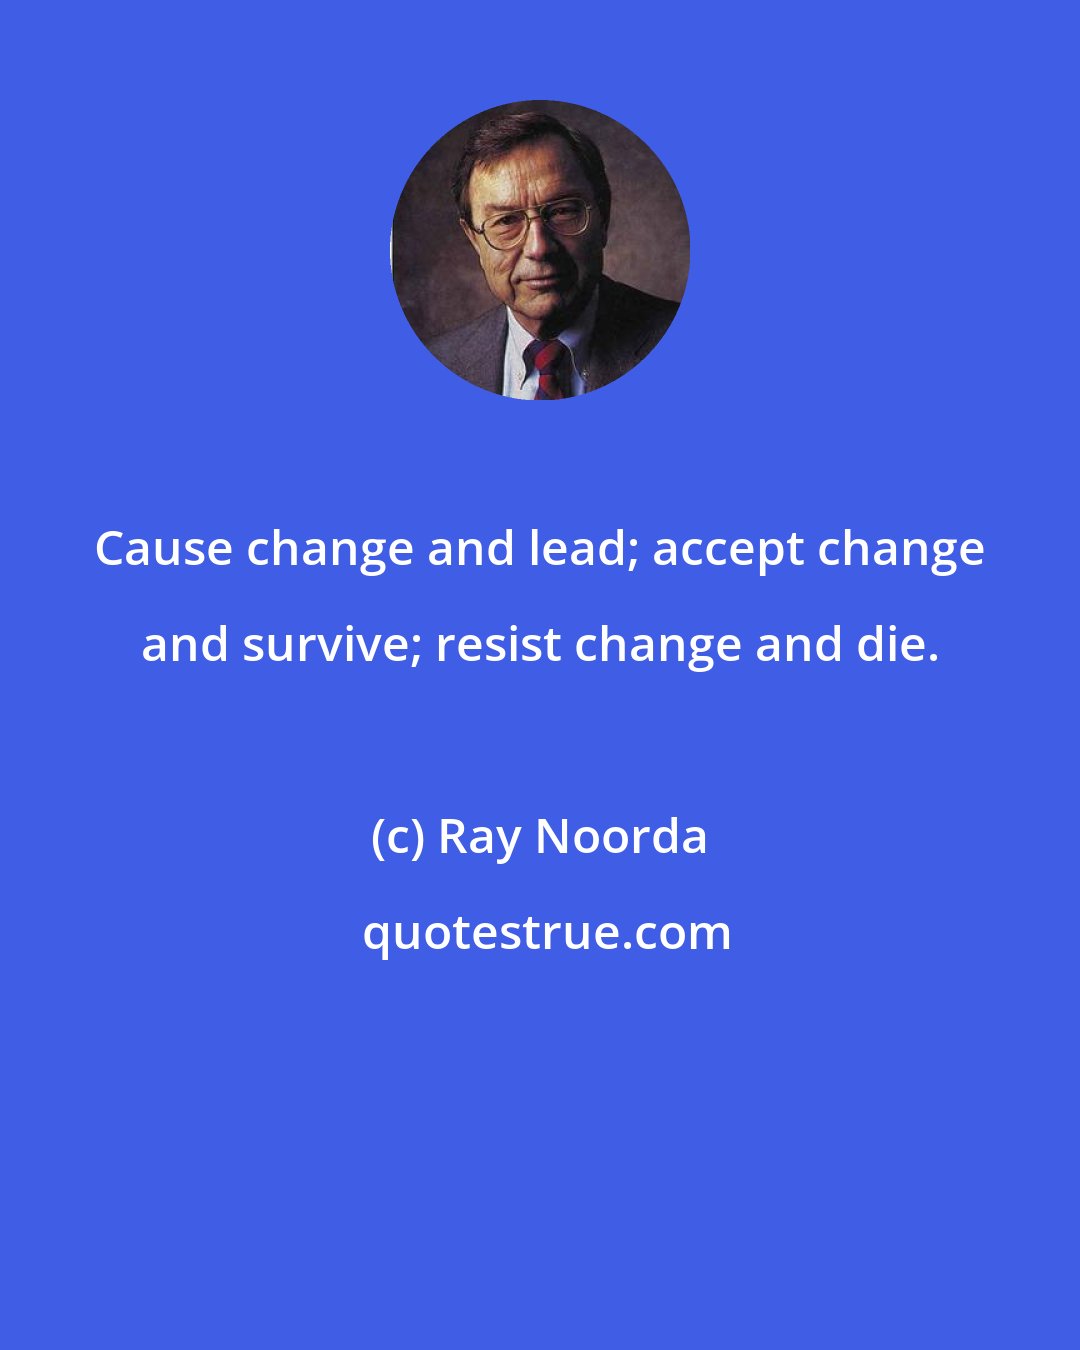 Ray Noorda: Cause change and lead; accept change and survive; resist change and die.